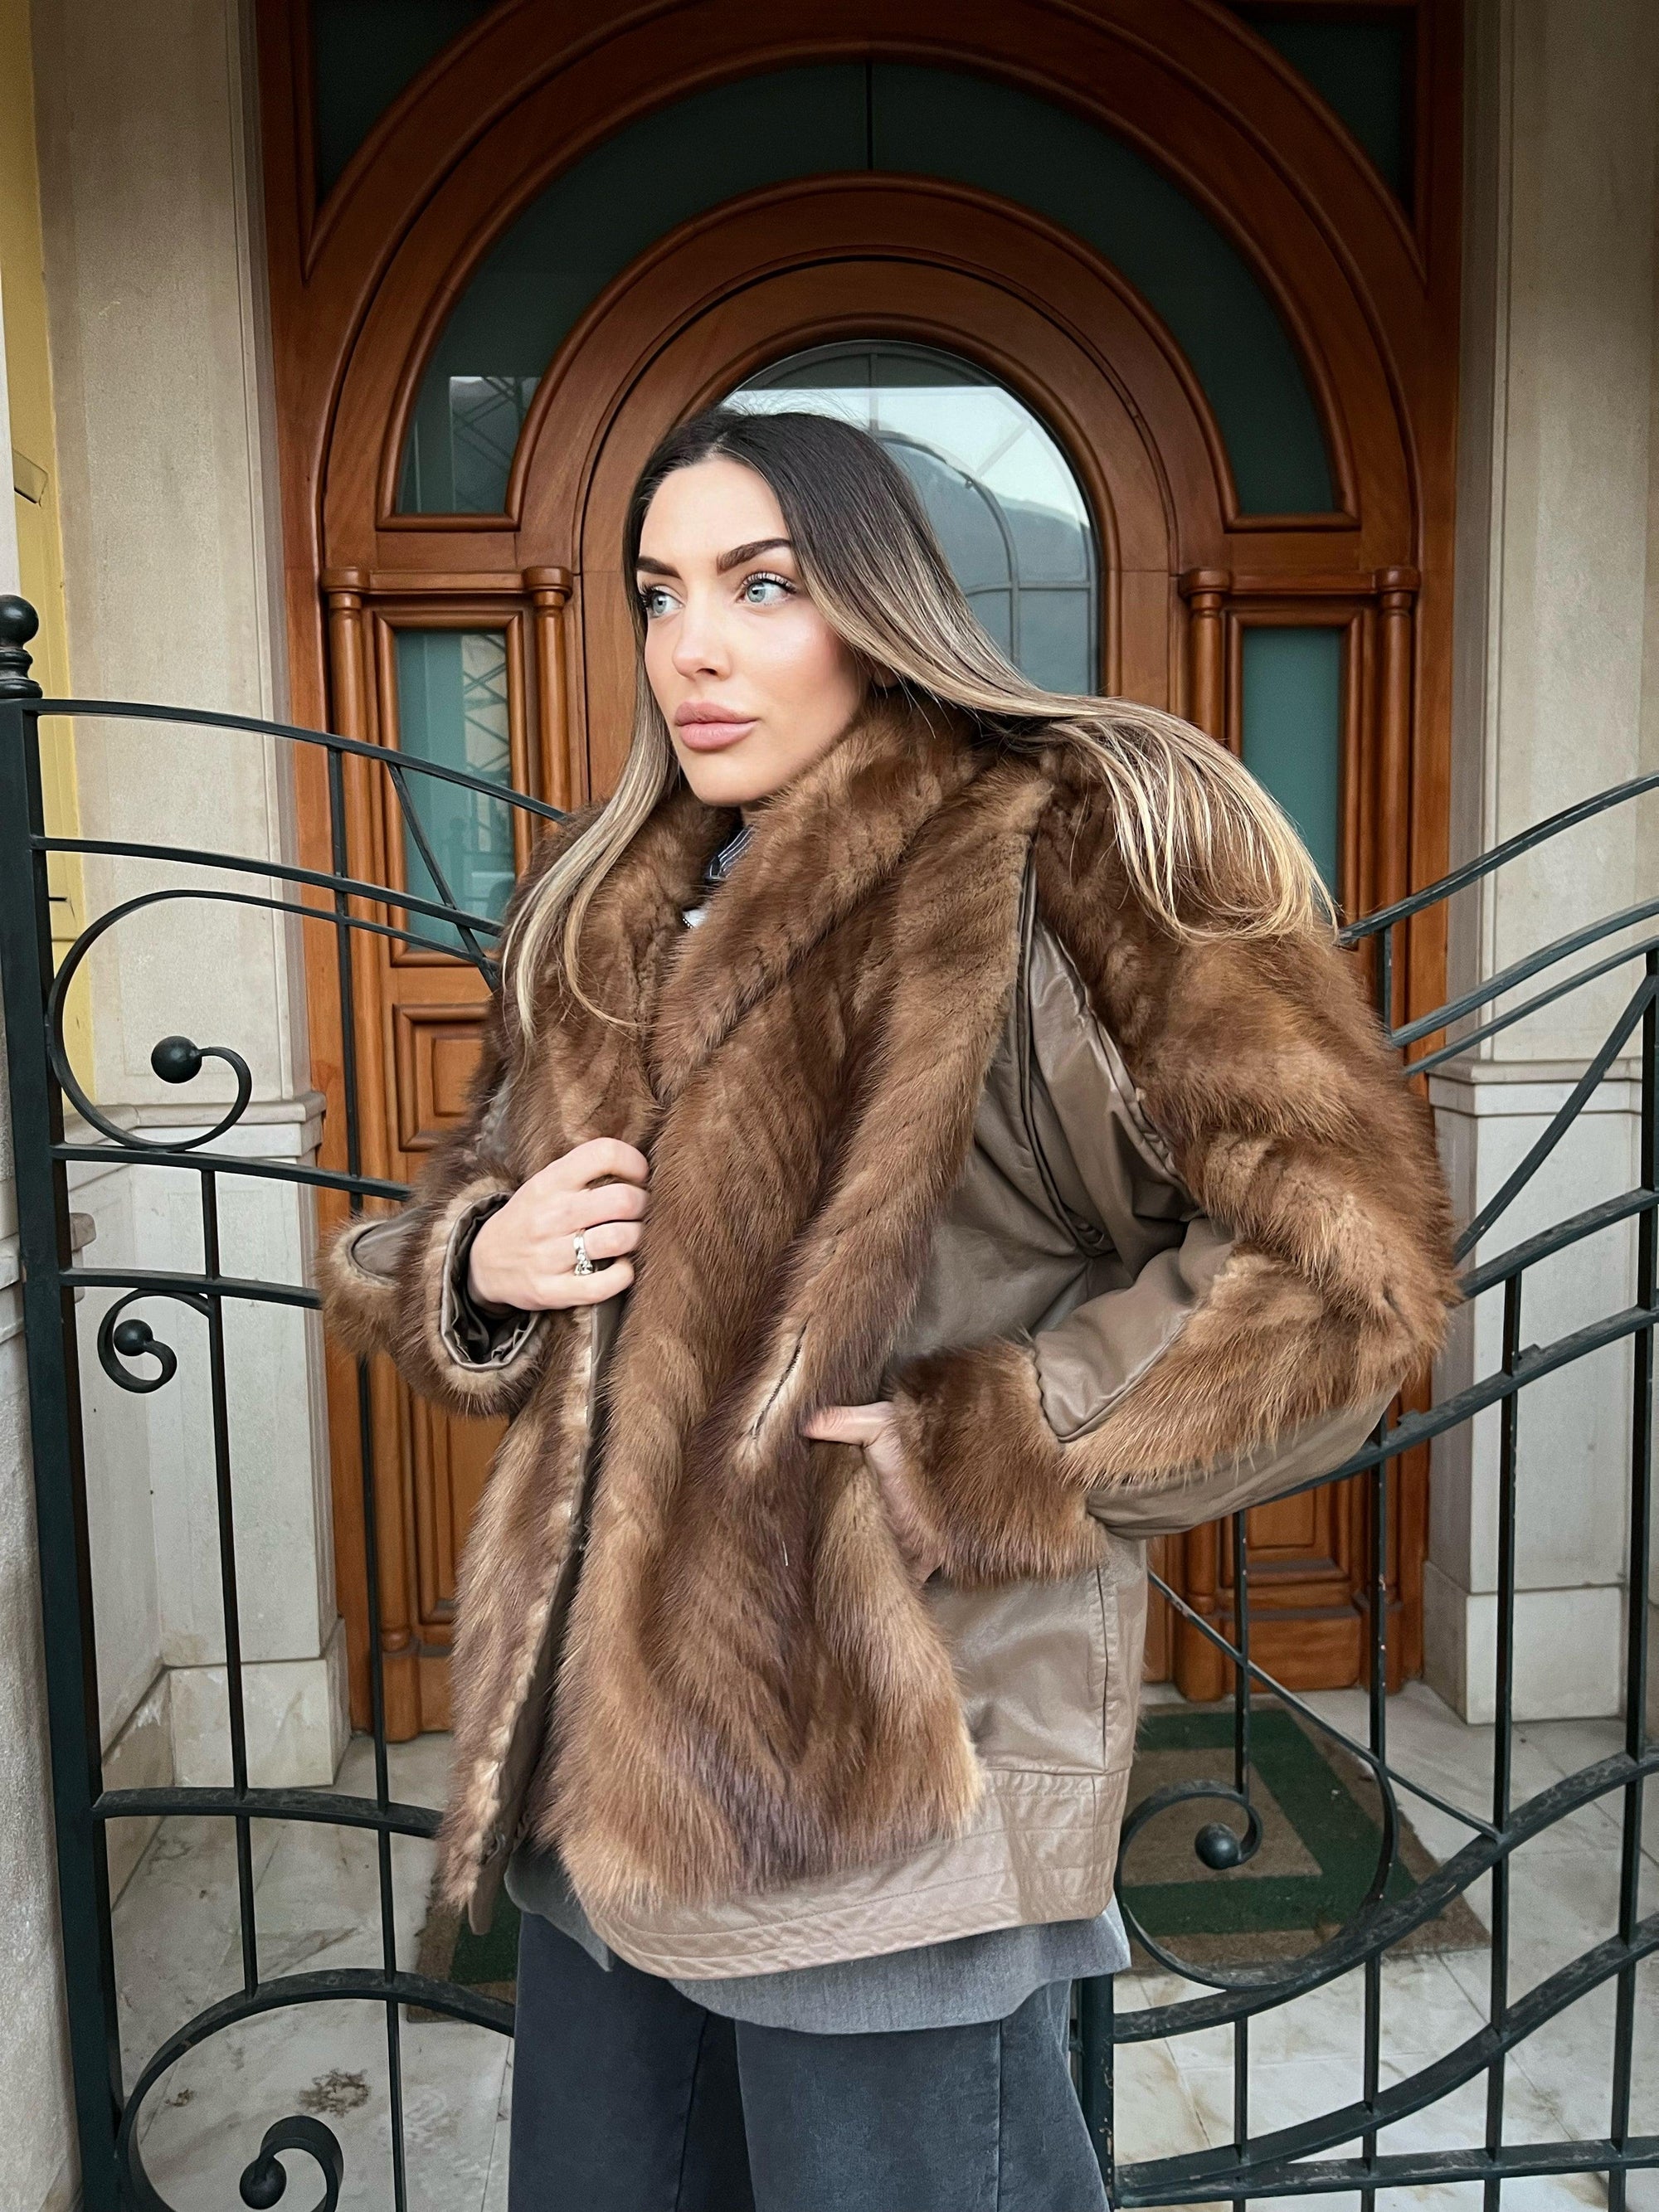 Pelliccia in visone con inserti in pelle  - limited edition - best quality - N28- pelliccia vintage non ecologica - real fur - special price - limited Edition